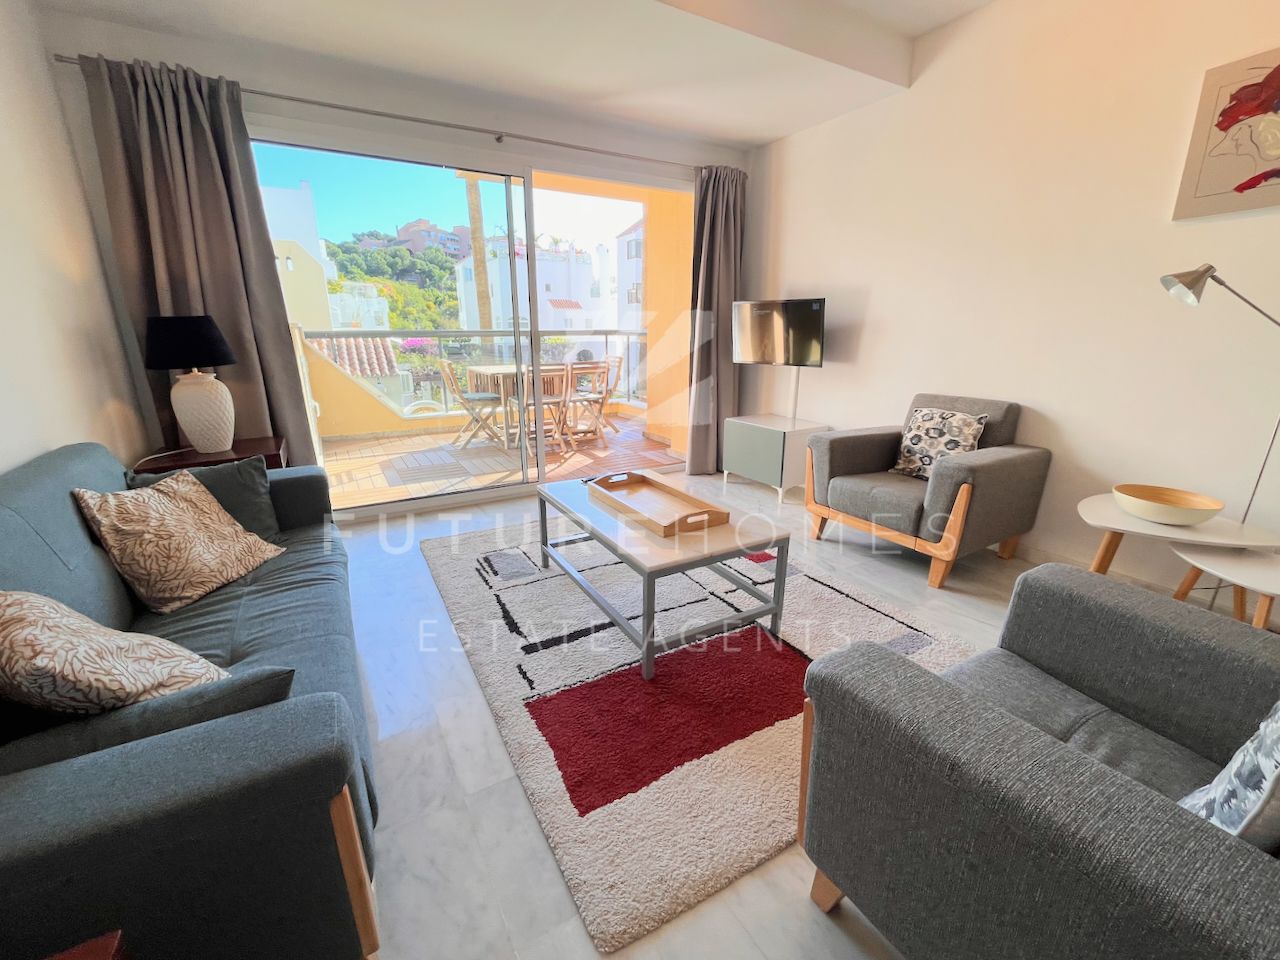 Immaculate apartment within frontline beach community overlooking Cristo Beach in Estepona